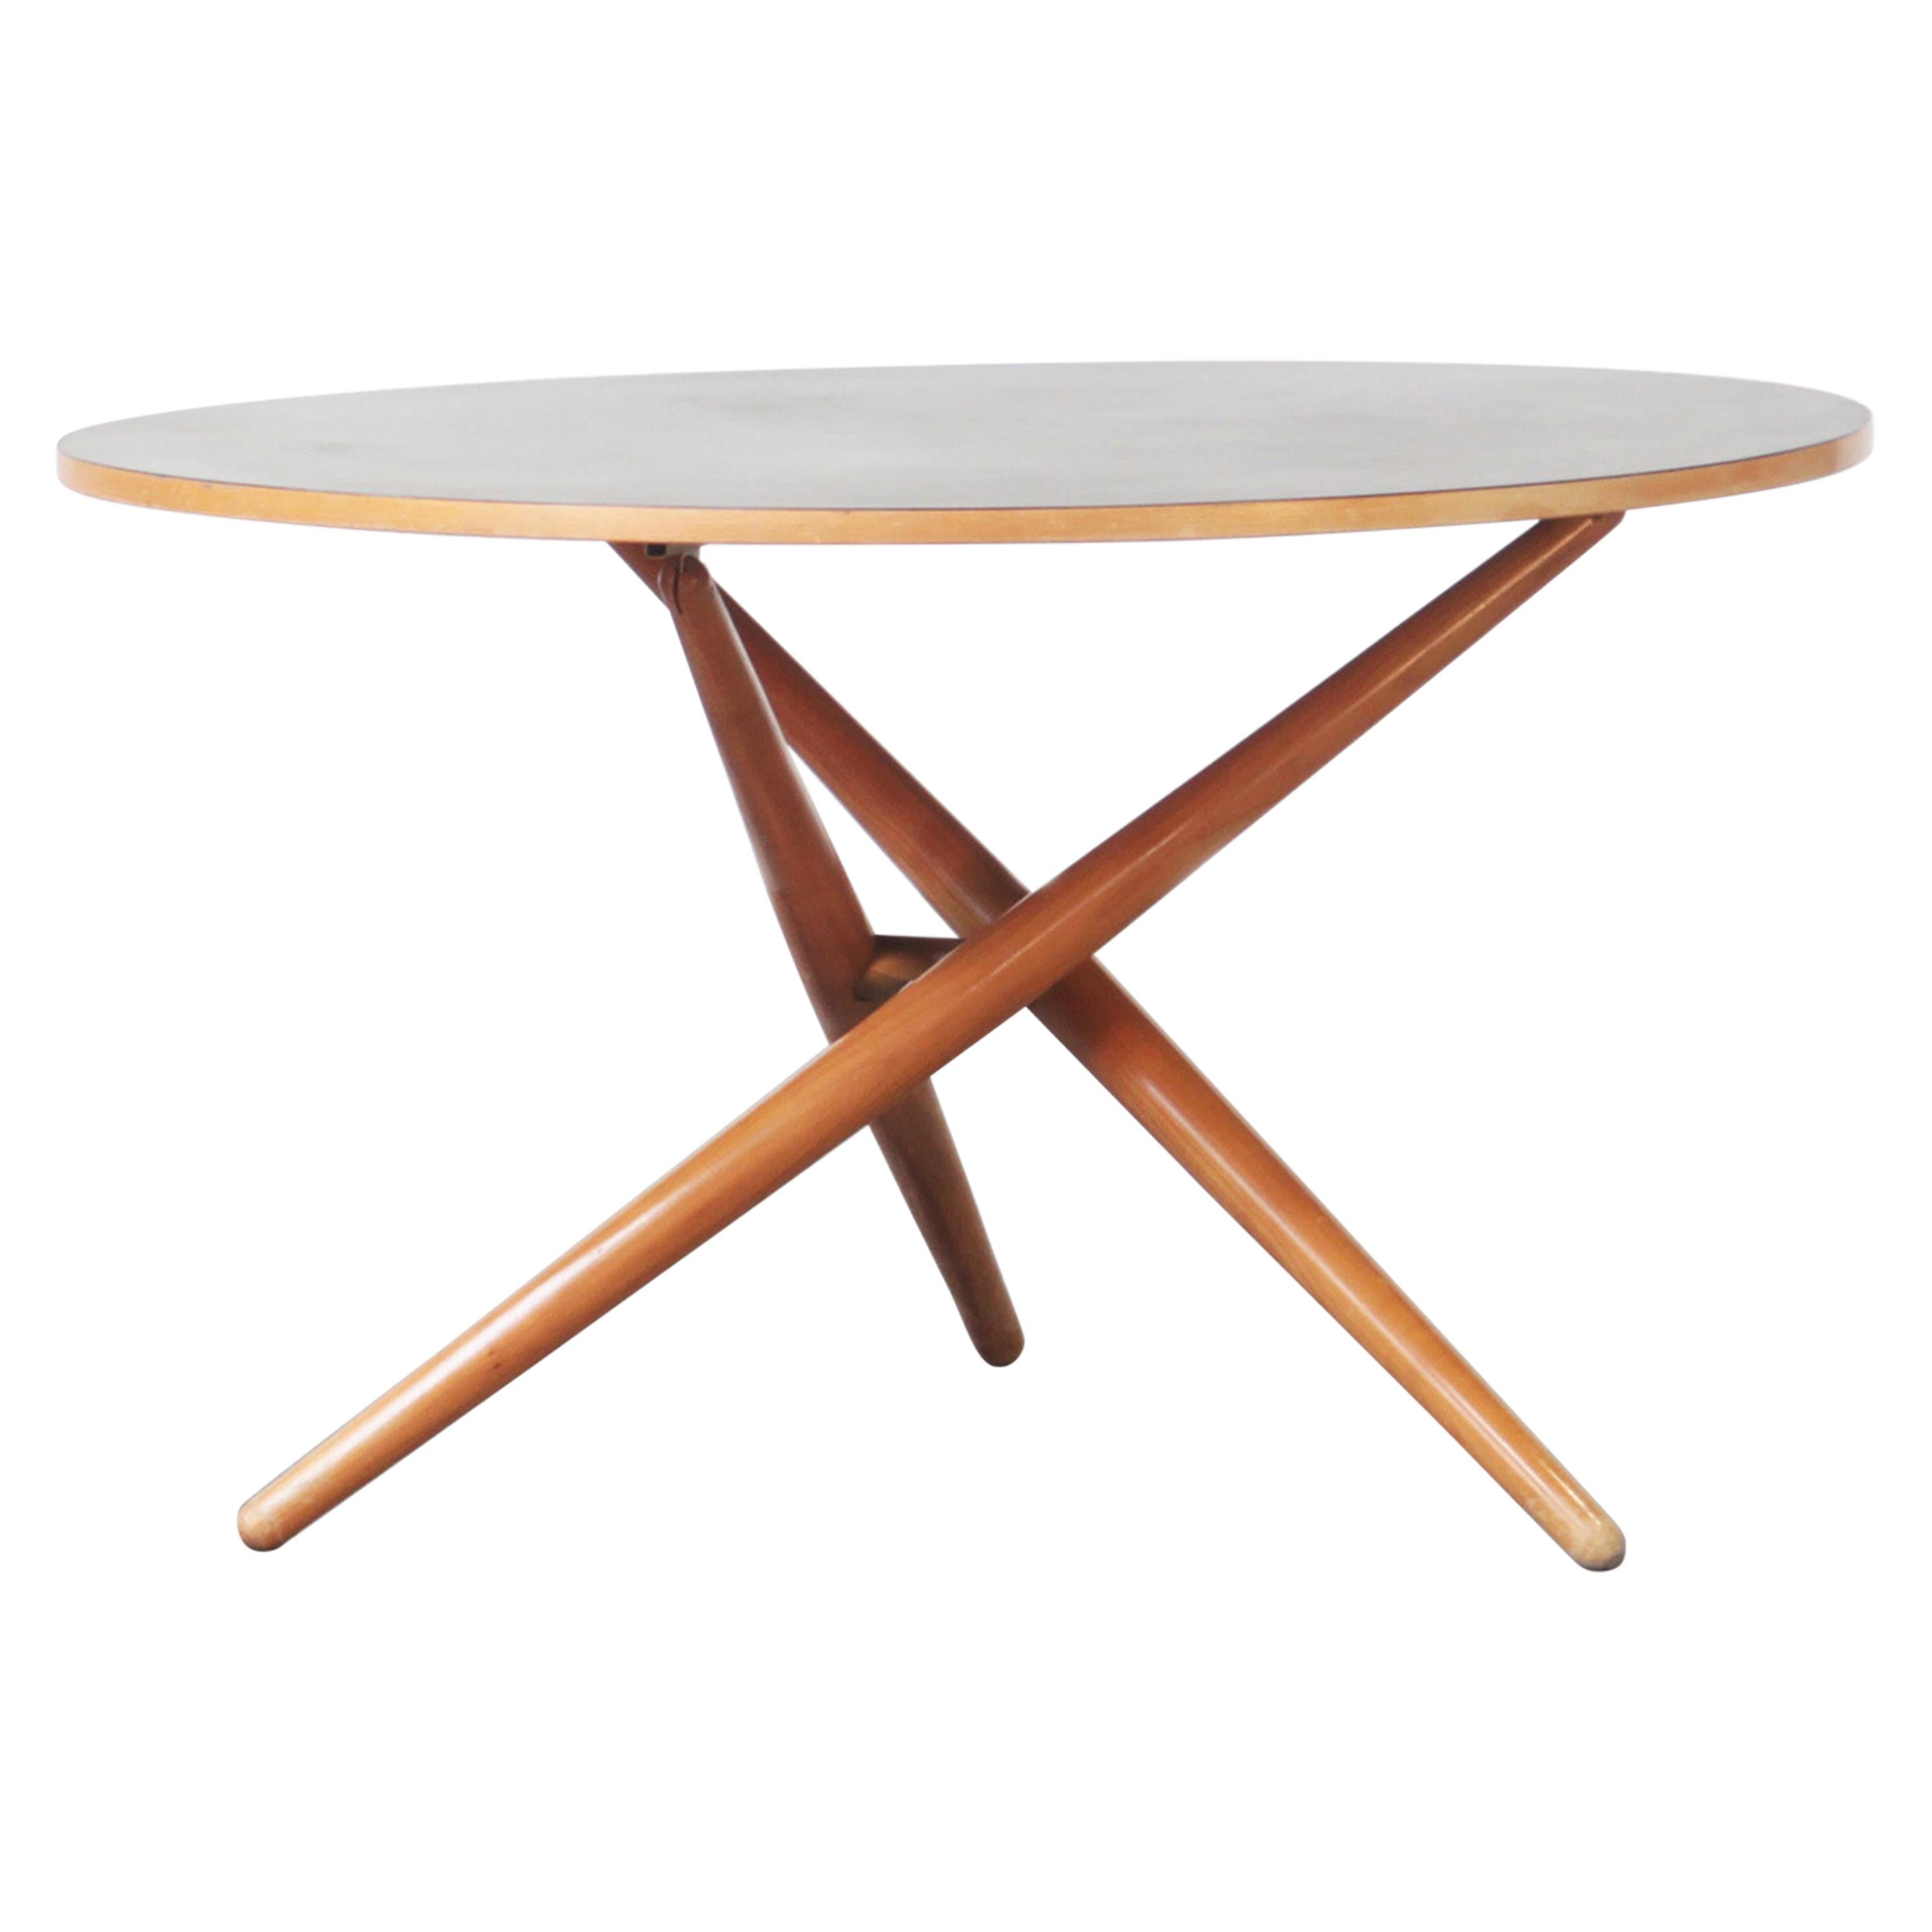 Round Dining Table by Jurg Bally Mod. Ess-Tee Table for Wohnhilfe, Switzerland